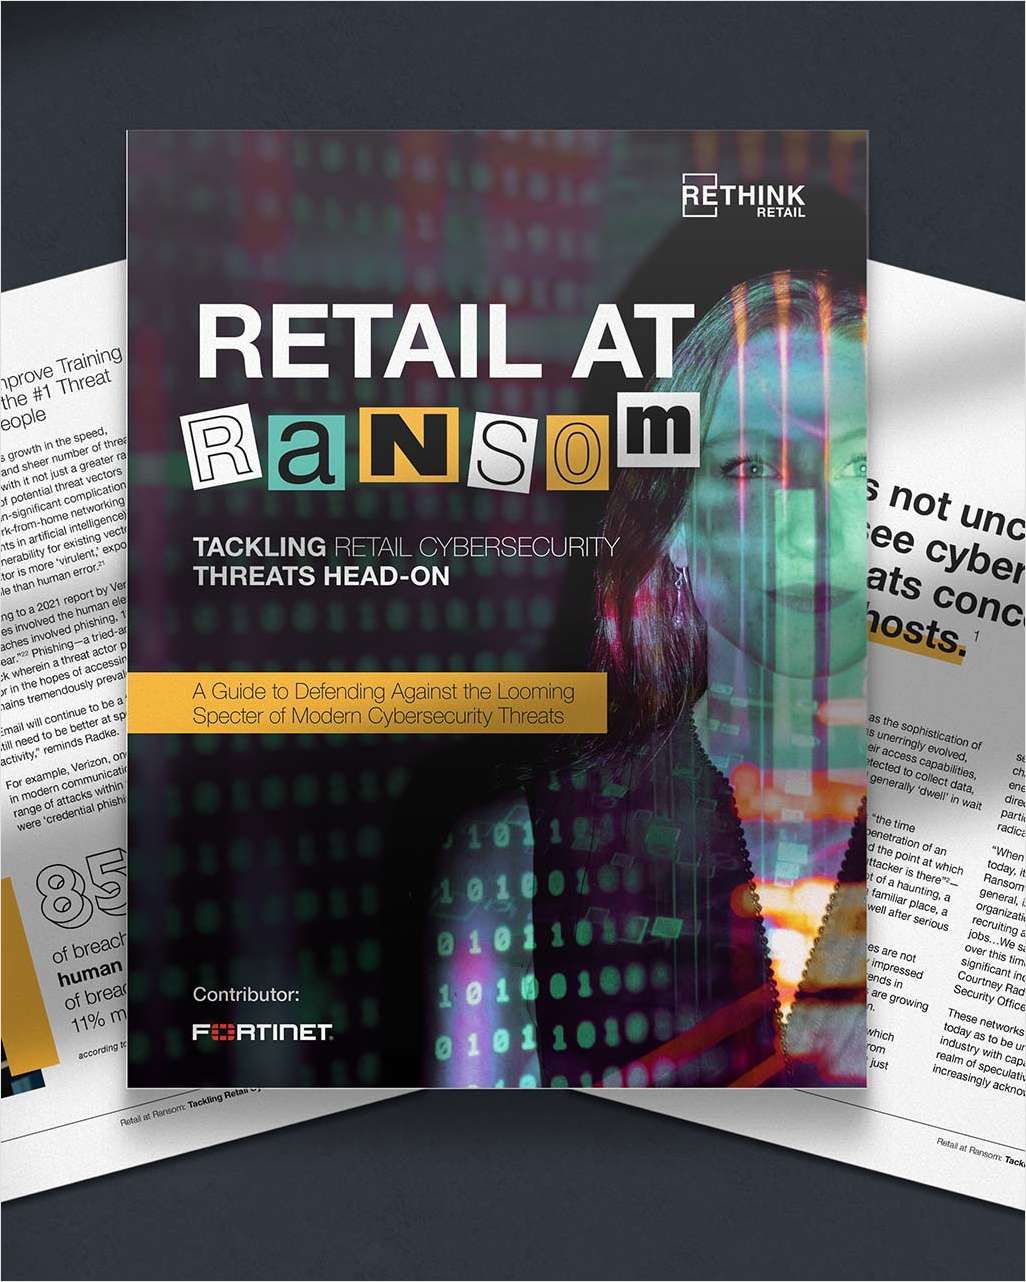 Retail at Ransom: Tackling Retail Cybersecurity Threats Head-on